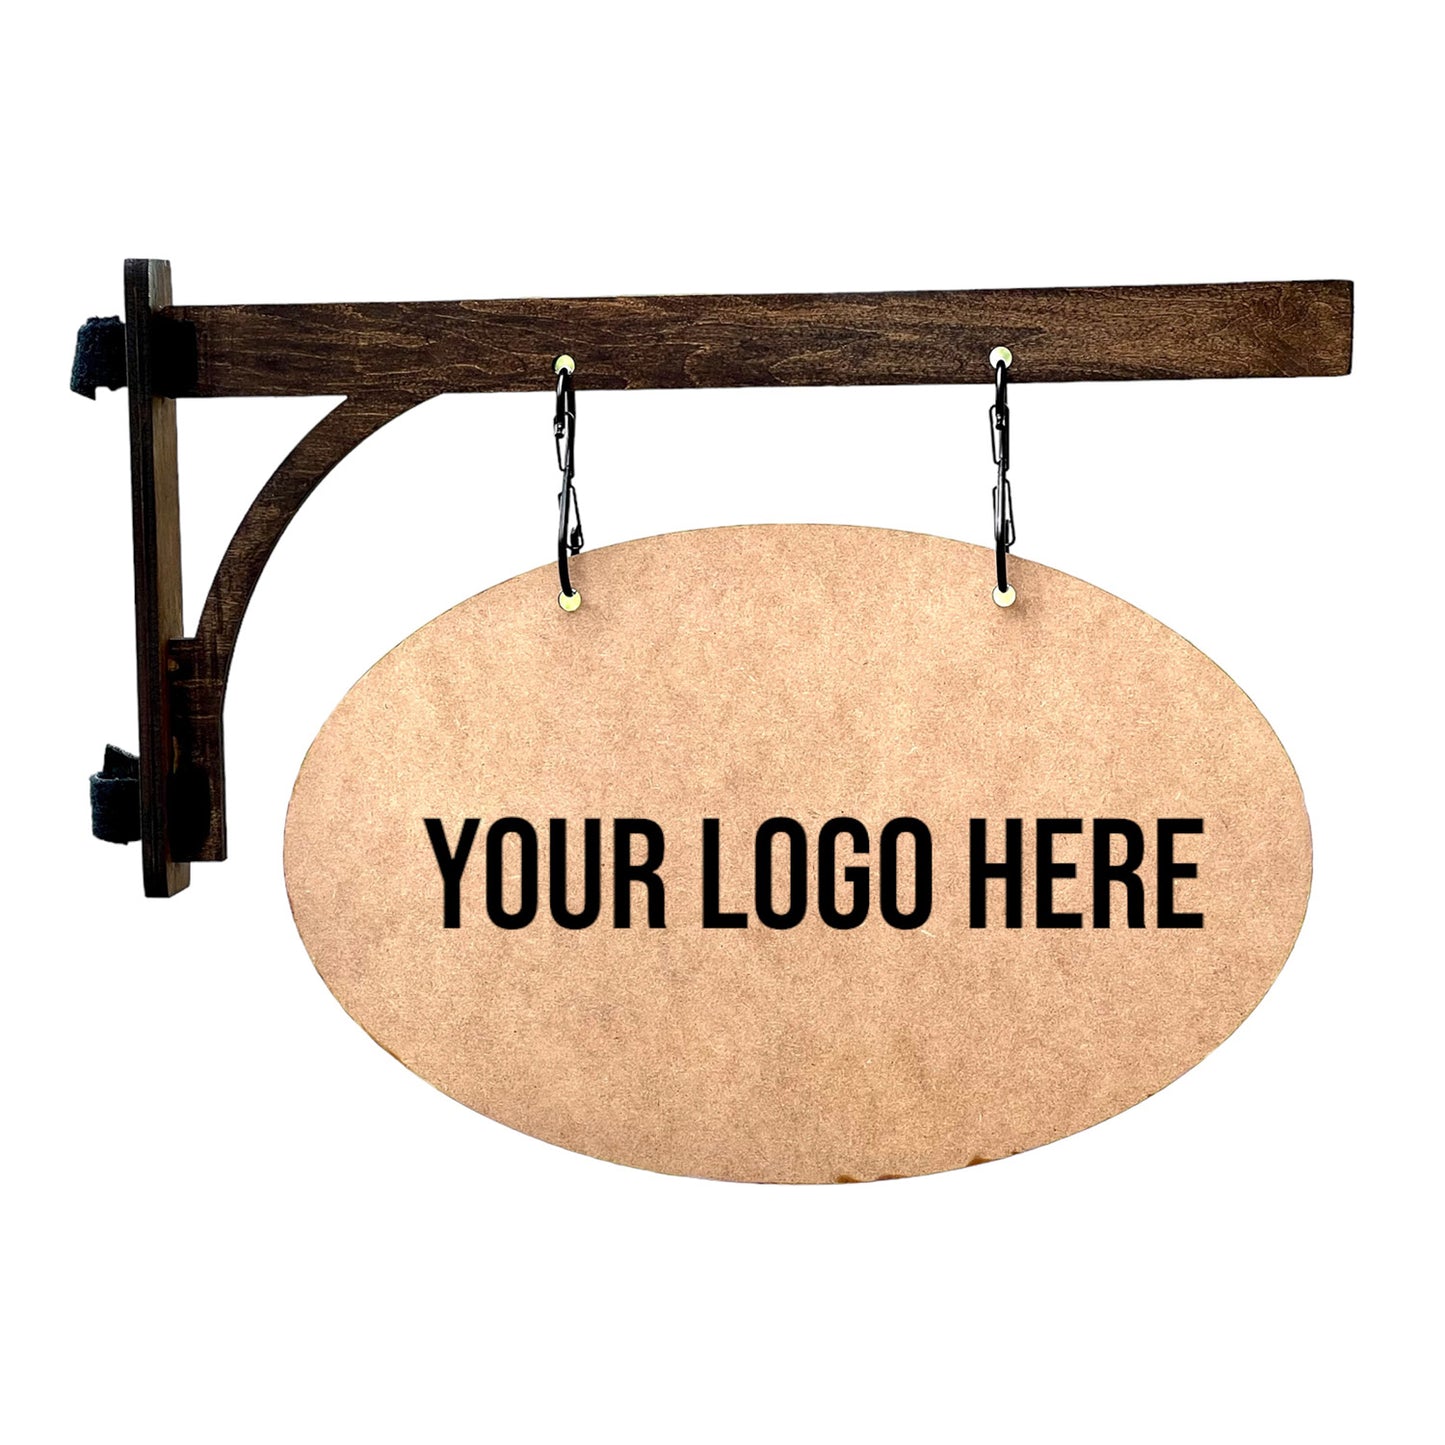 Customizable Tent / Market Hanging Booth Sign - Business Name Display